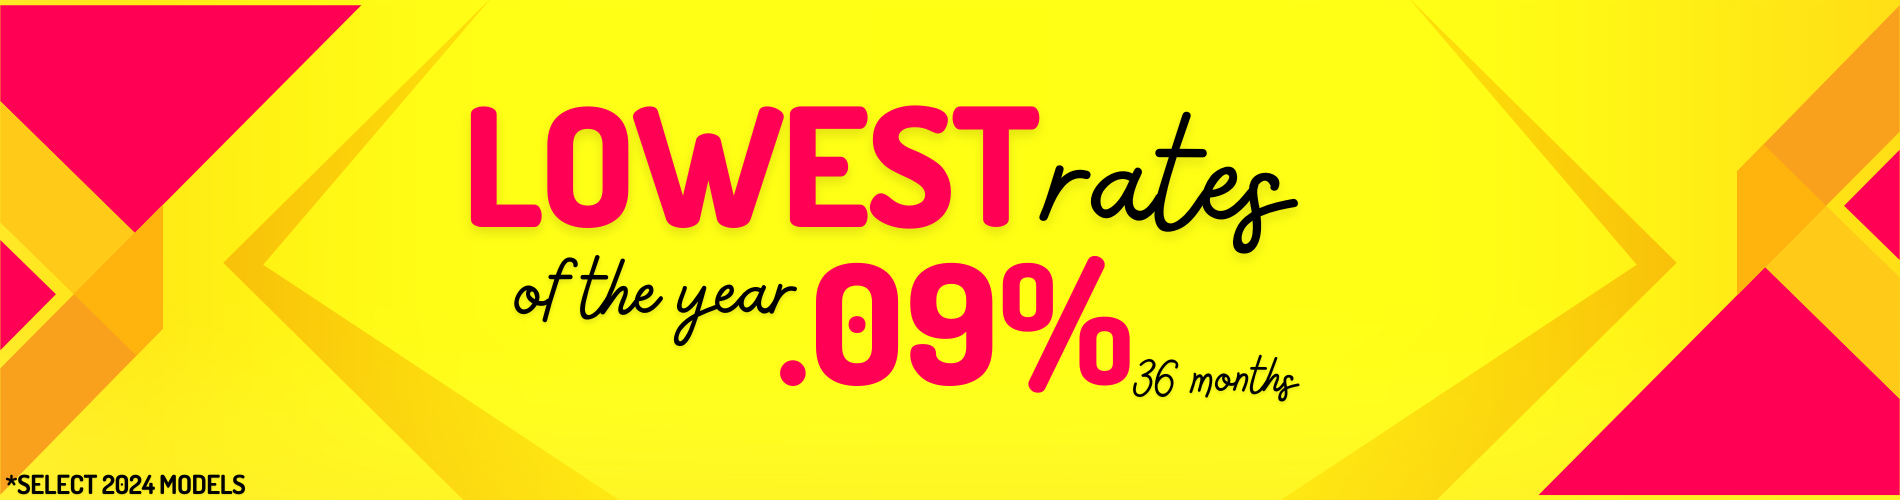 Lowest rates